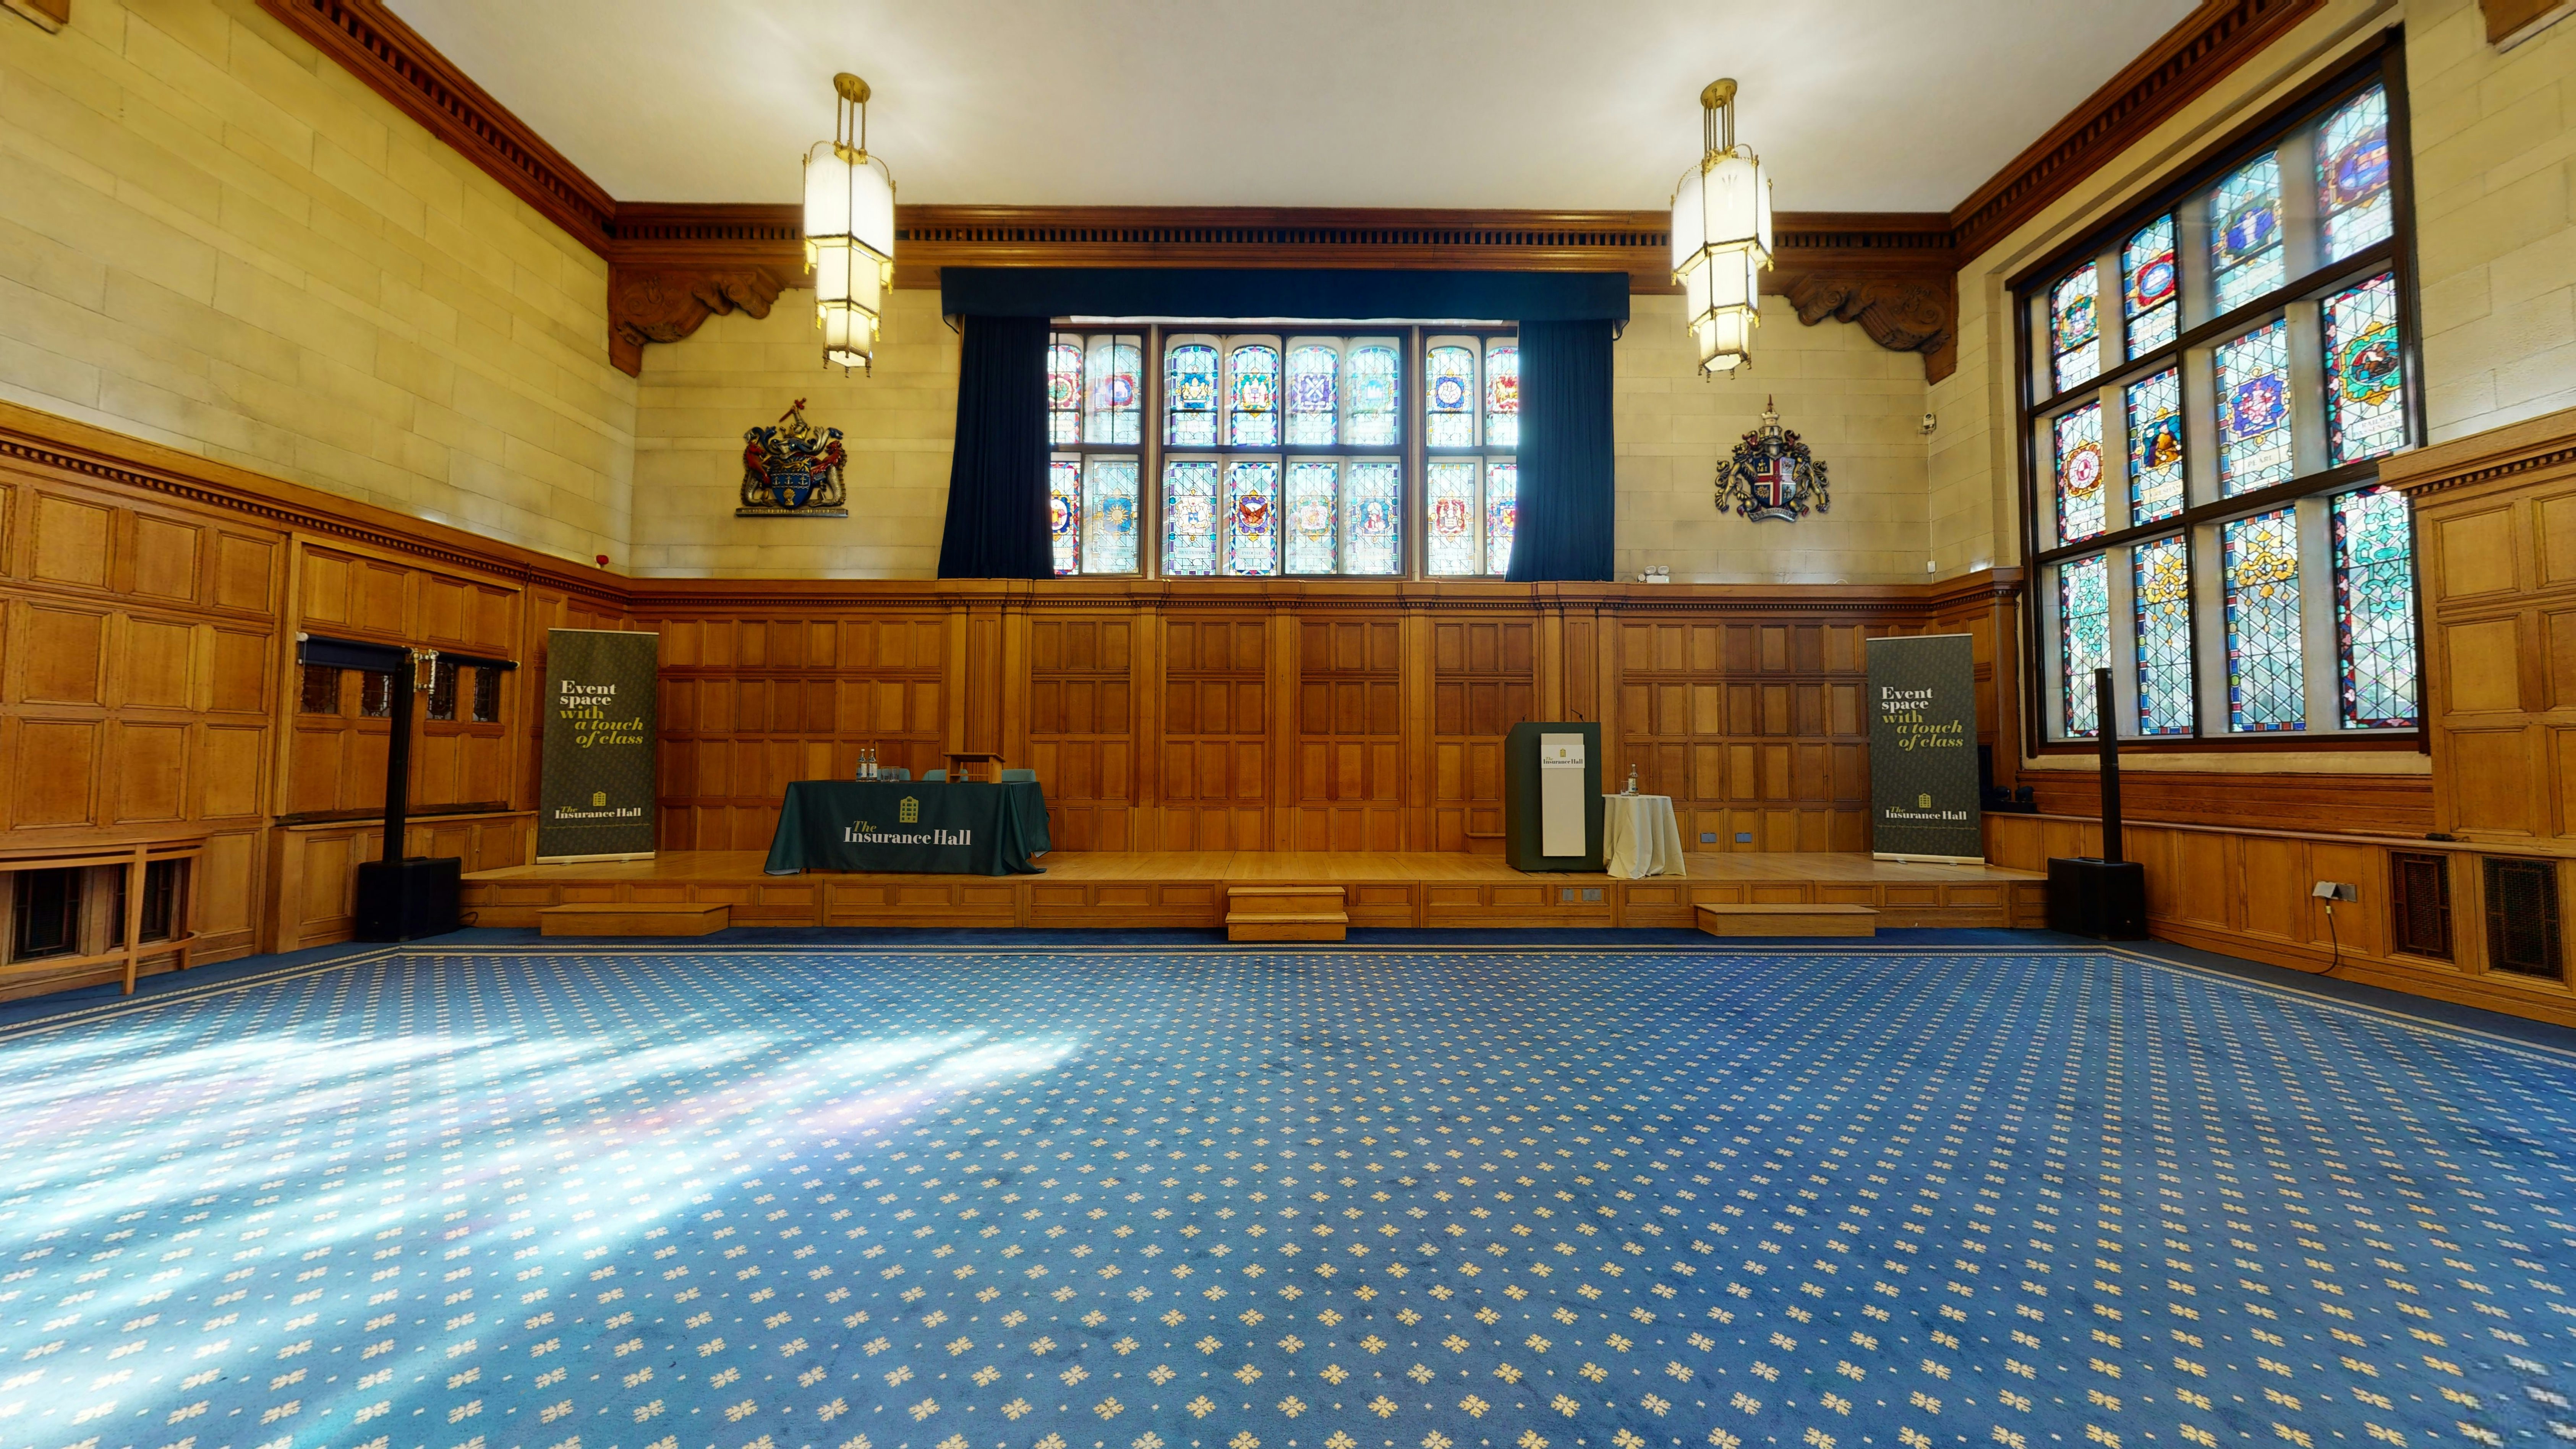 The Insurance Hall - The Great Hall image 4